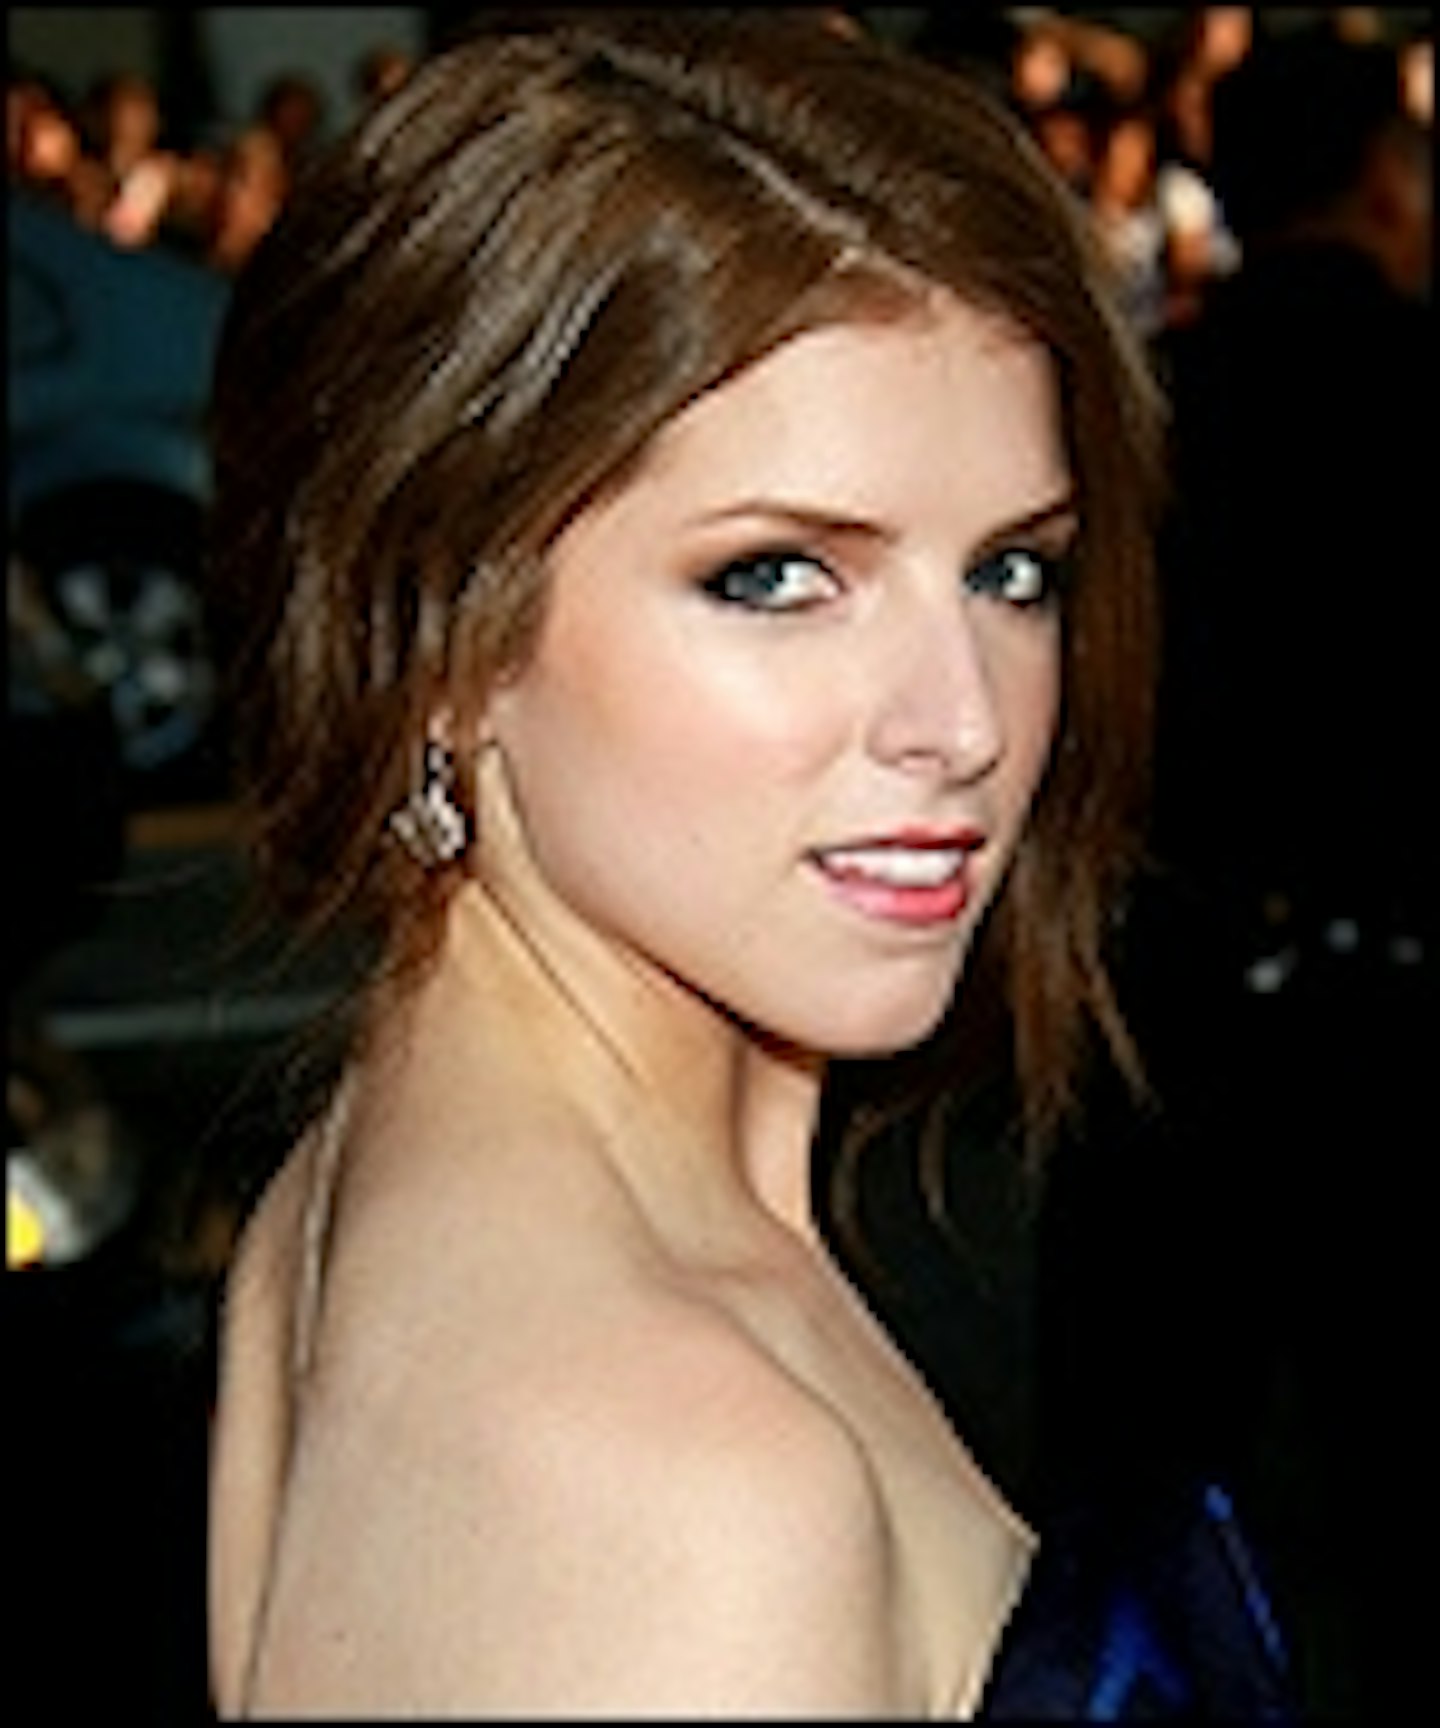 Anna Kendrick Set For Mike And Dave Need Wedding Dates